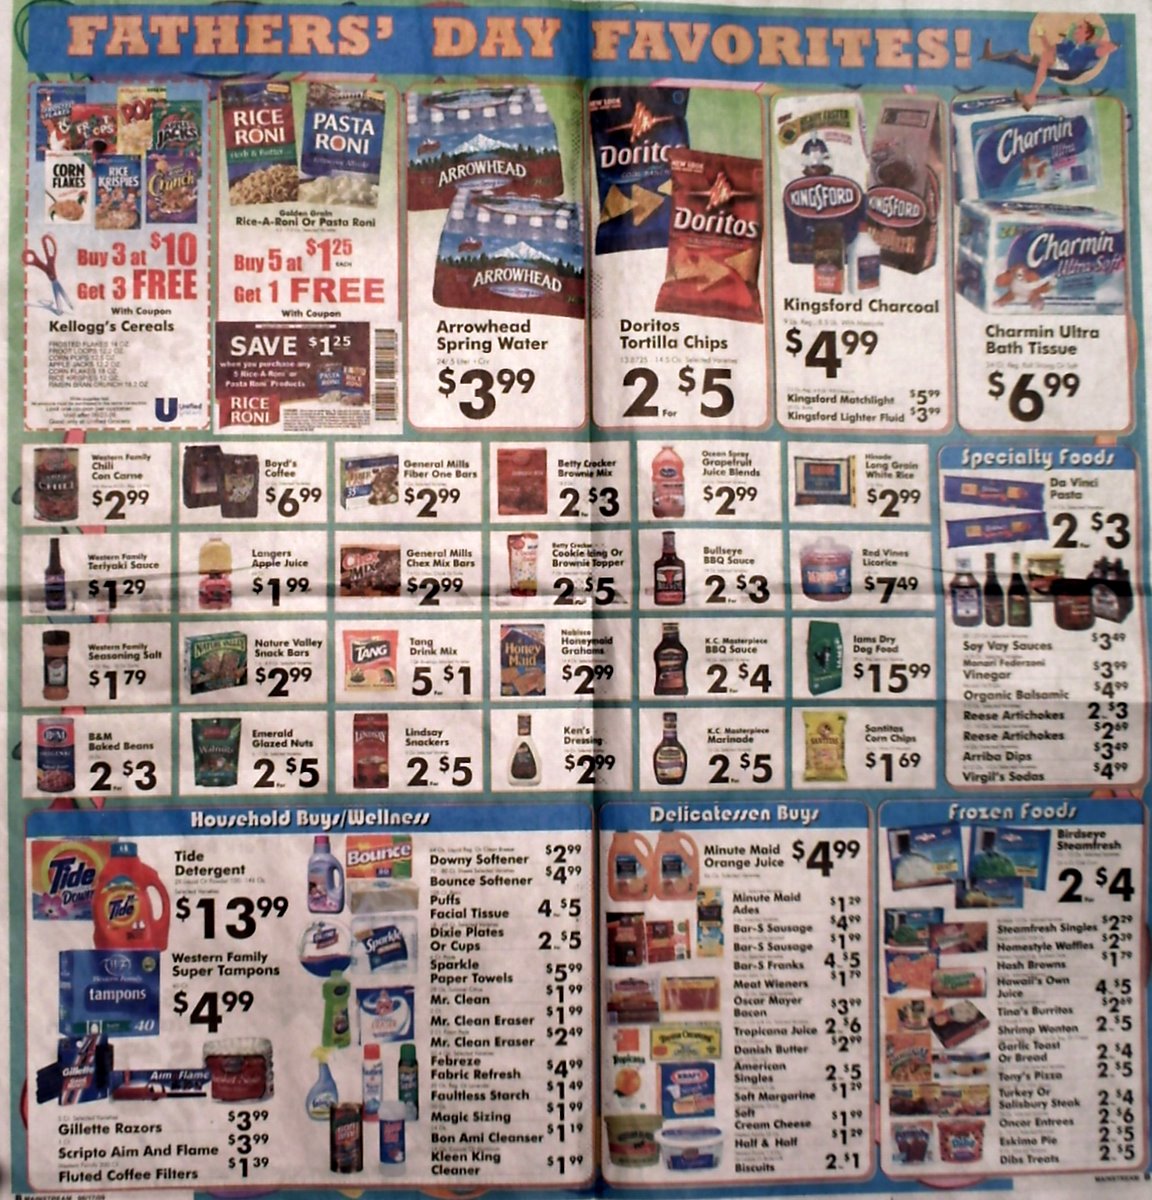 Big Trees Market Weekly Ad for June 17 - 23, 2009